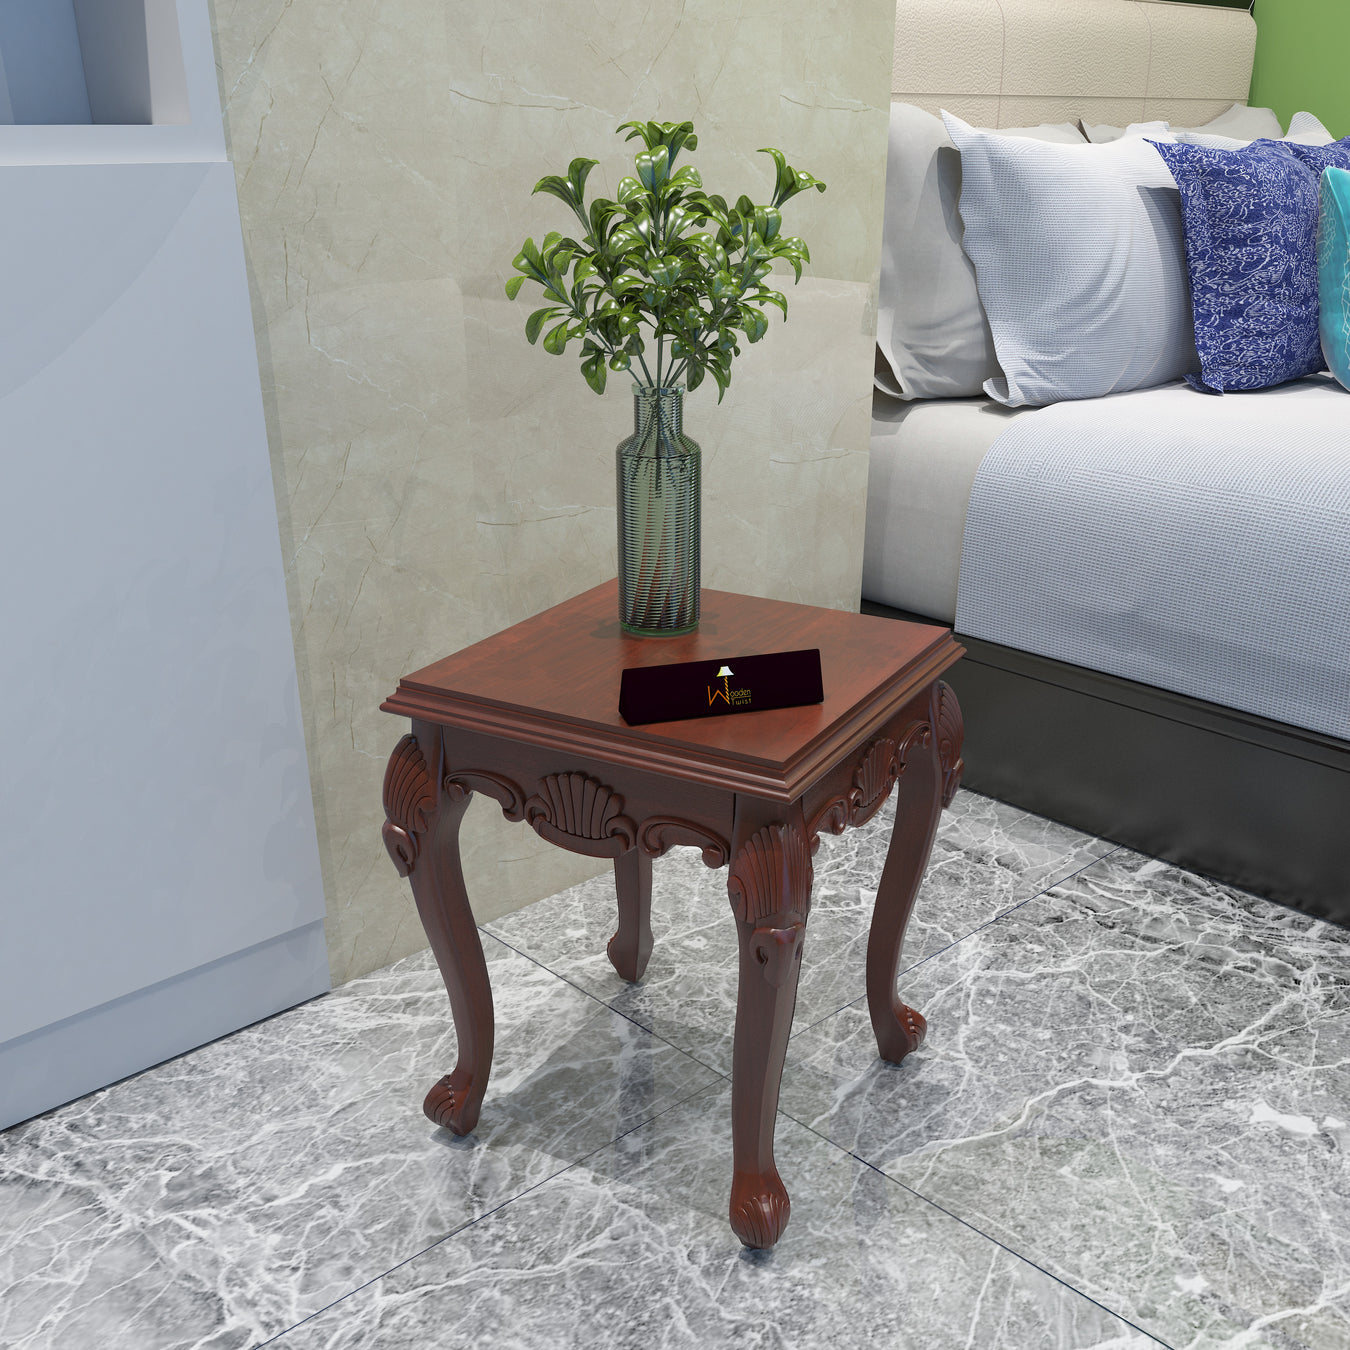 End Tables - WoodenTwist